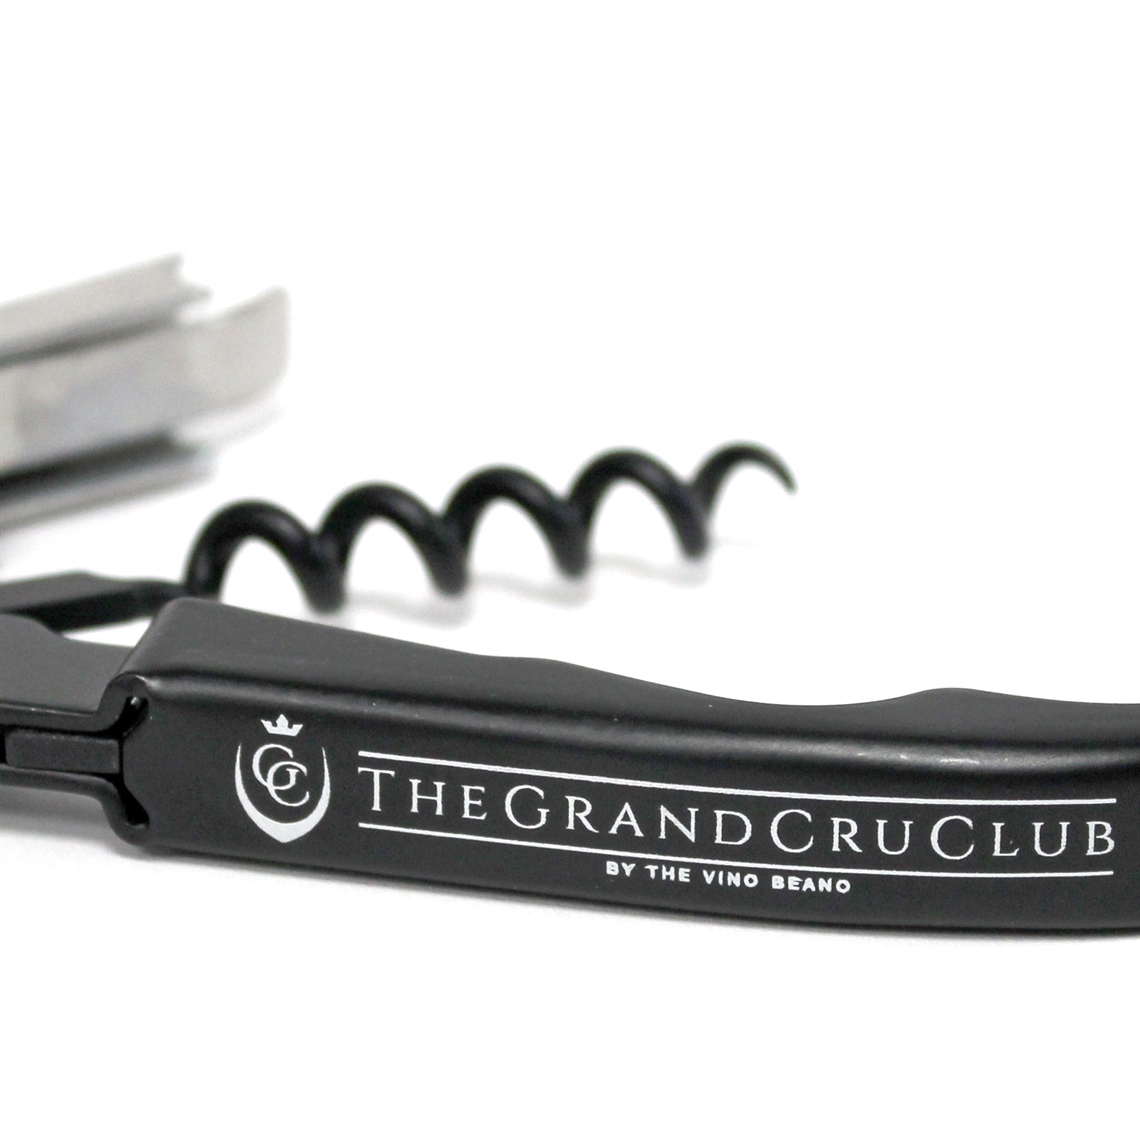 View more waiters friend  from our Branded Corkscrews & Bottle Openers range